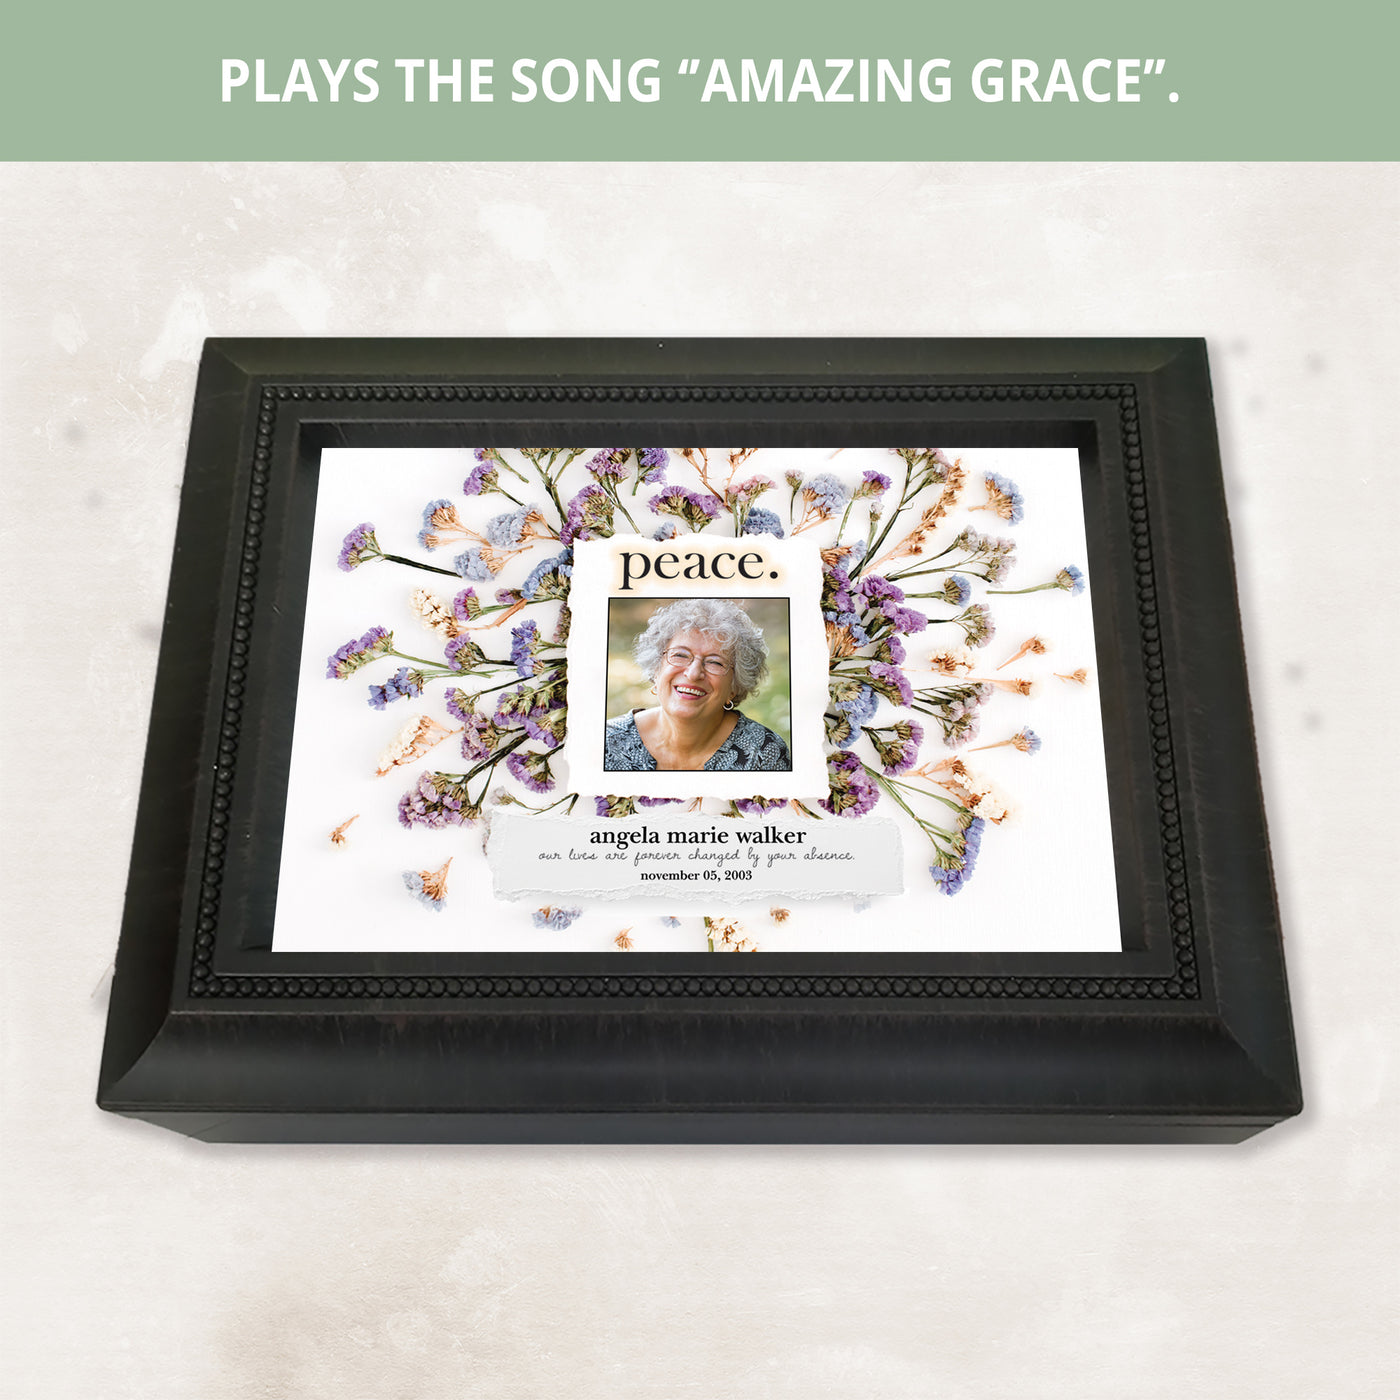 Peace | Personalized Memorial, Grief, Sympathy, Bereavement, Condolence, Funeral, Celebration of Life Gift - Music Box Photo